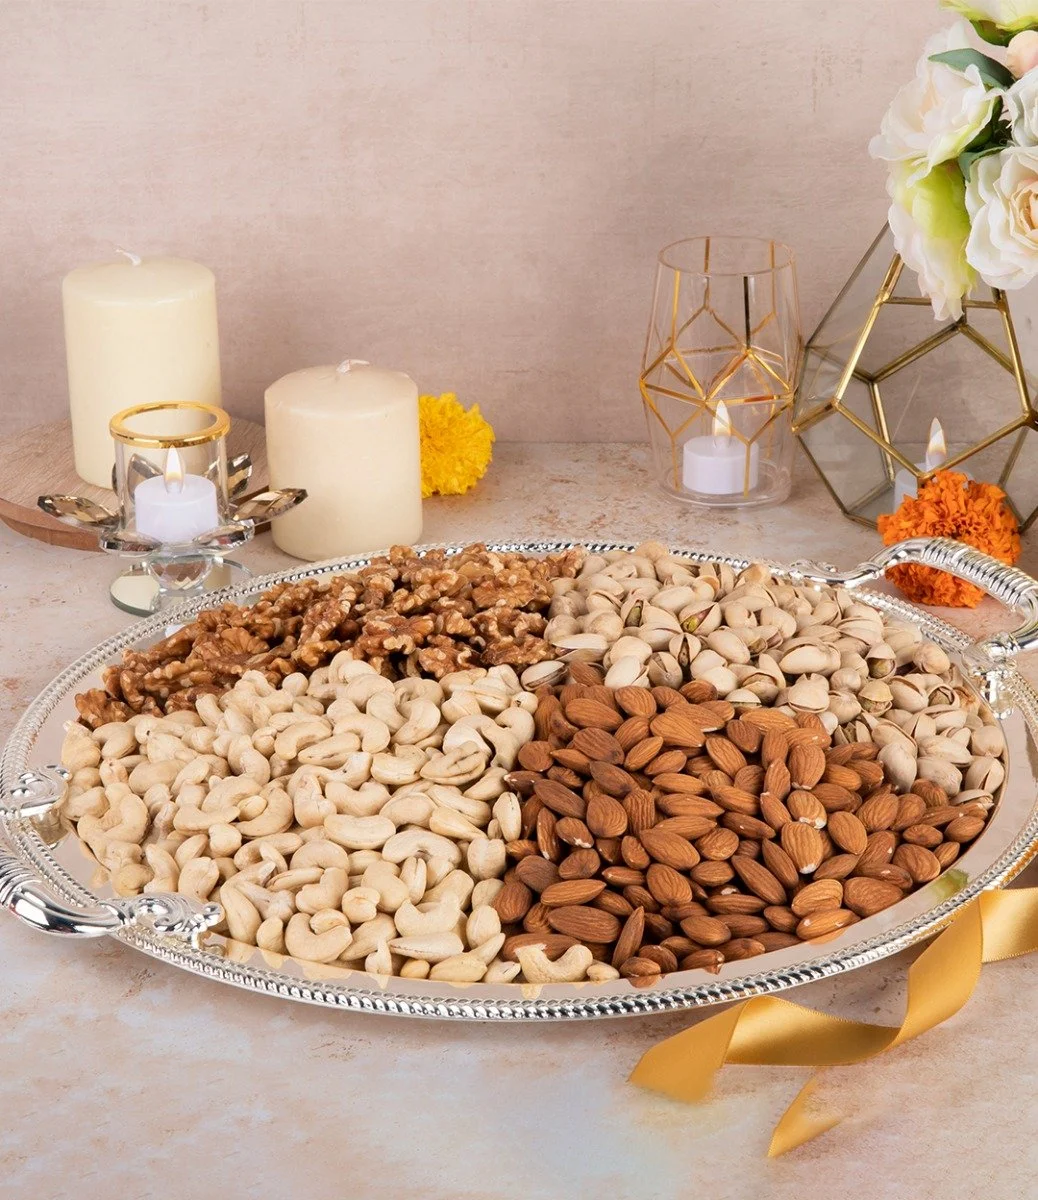 Diwali Special Assorted Dryfruits Thal 1.7kg by My Govinda's